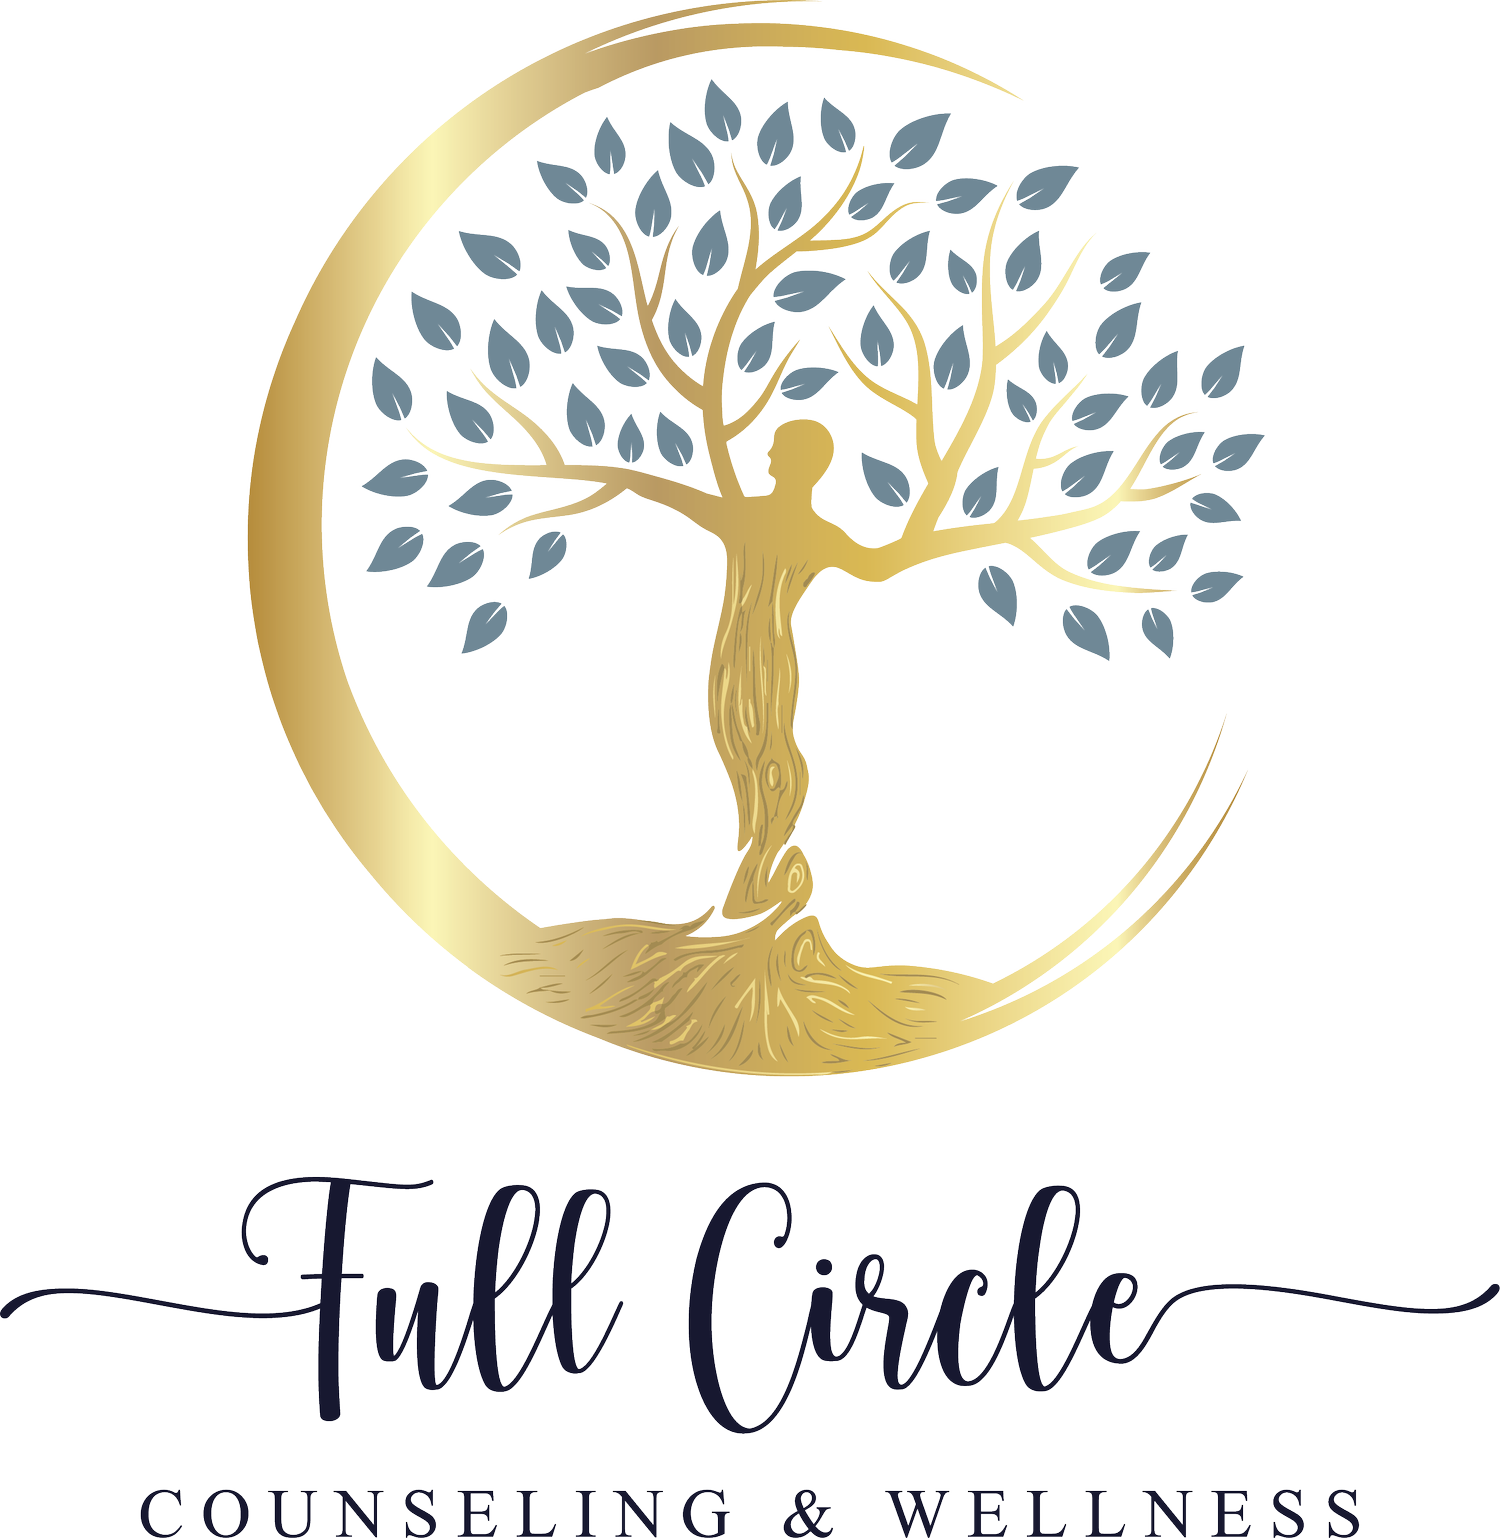 Full Circle Counseling and Wellness